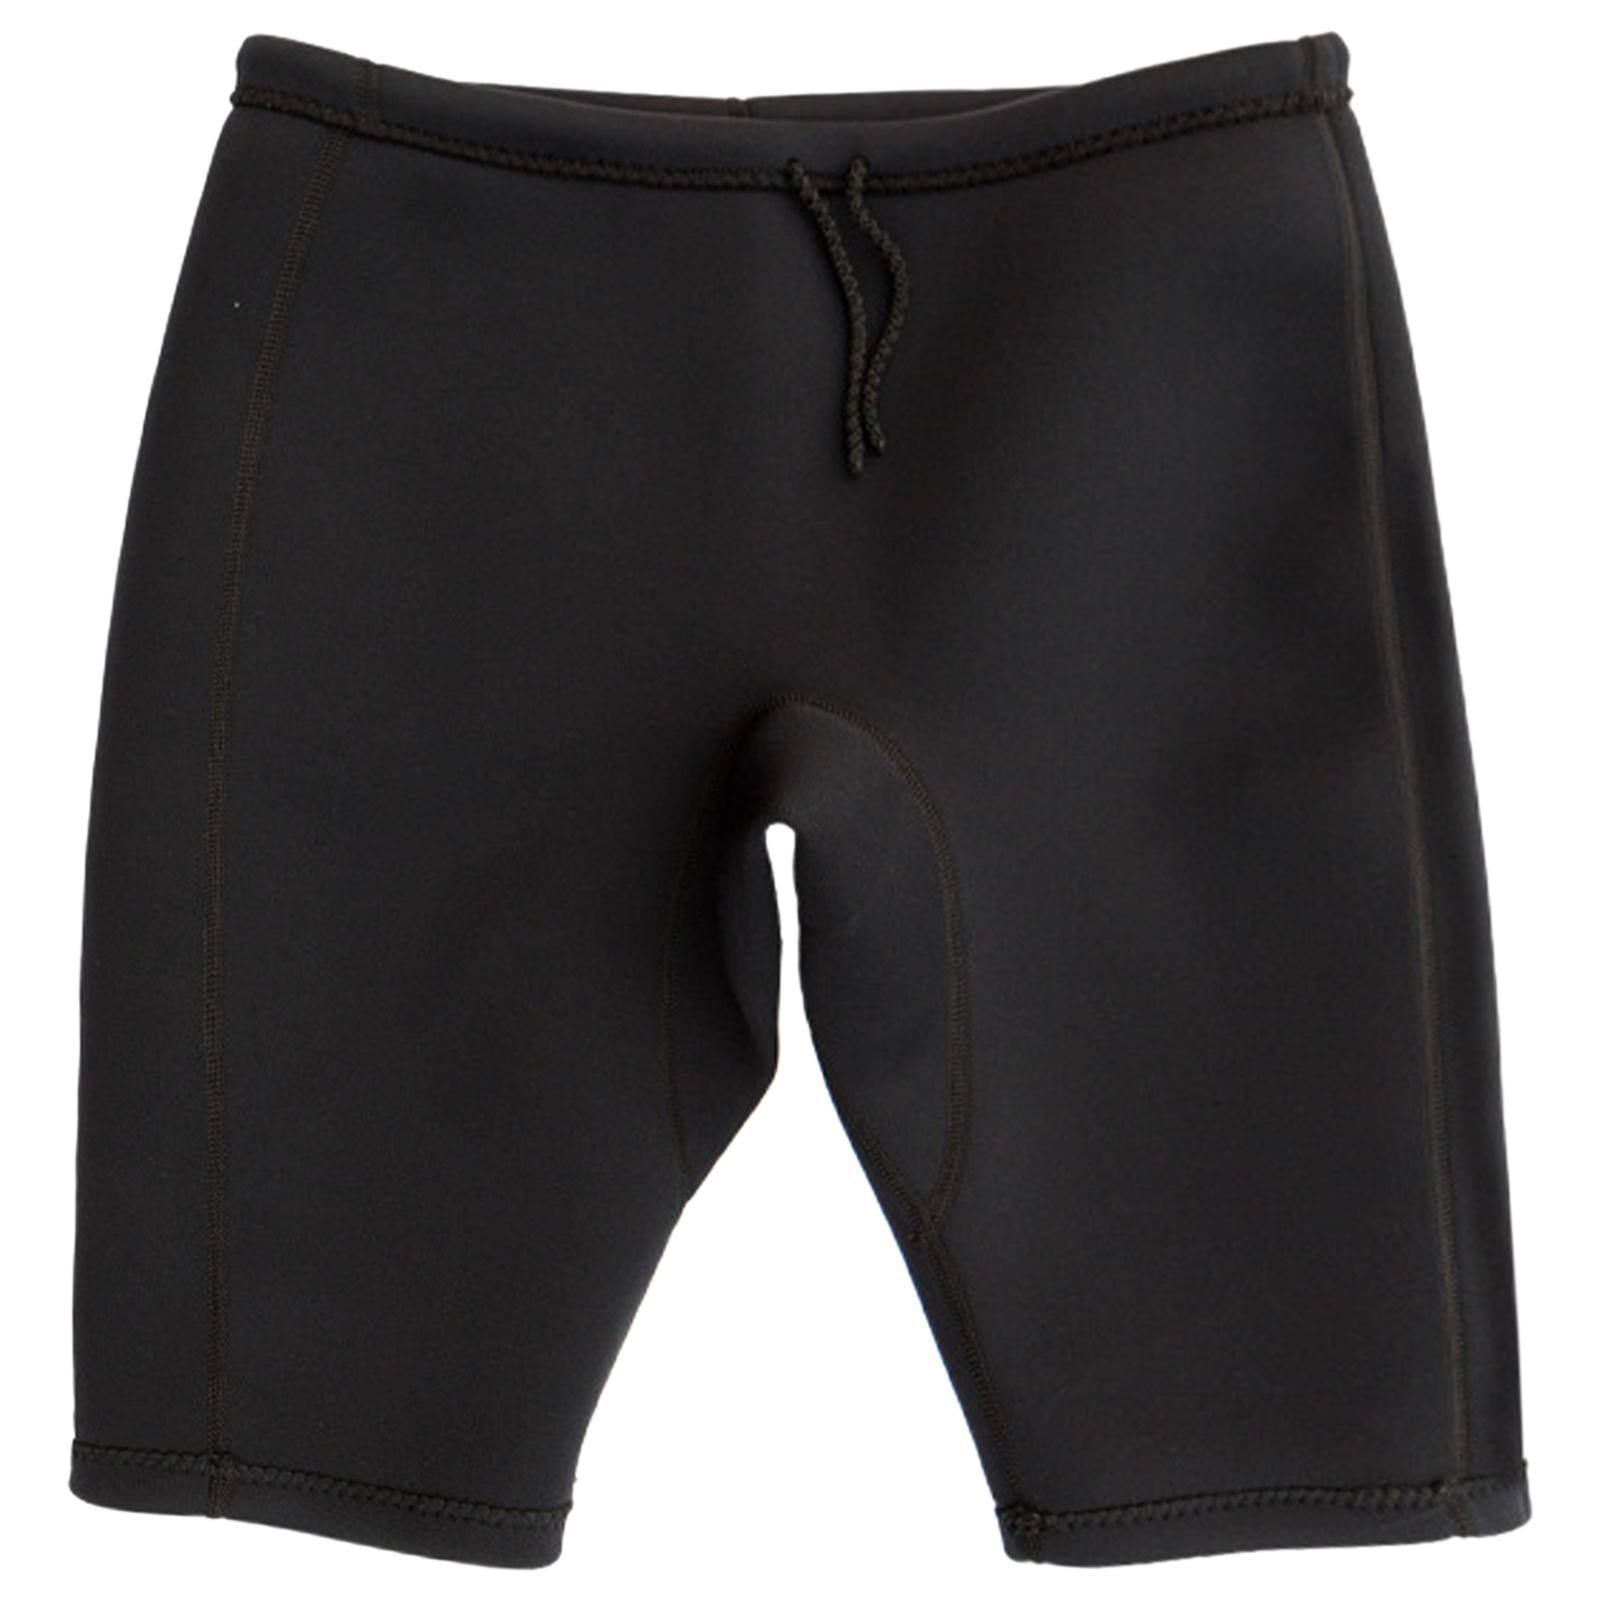 Mens 3mm Neoprene Wetsuit Shorts Pants for Swimming Surf Surfing Paddleboard 